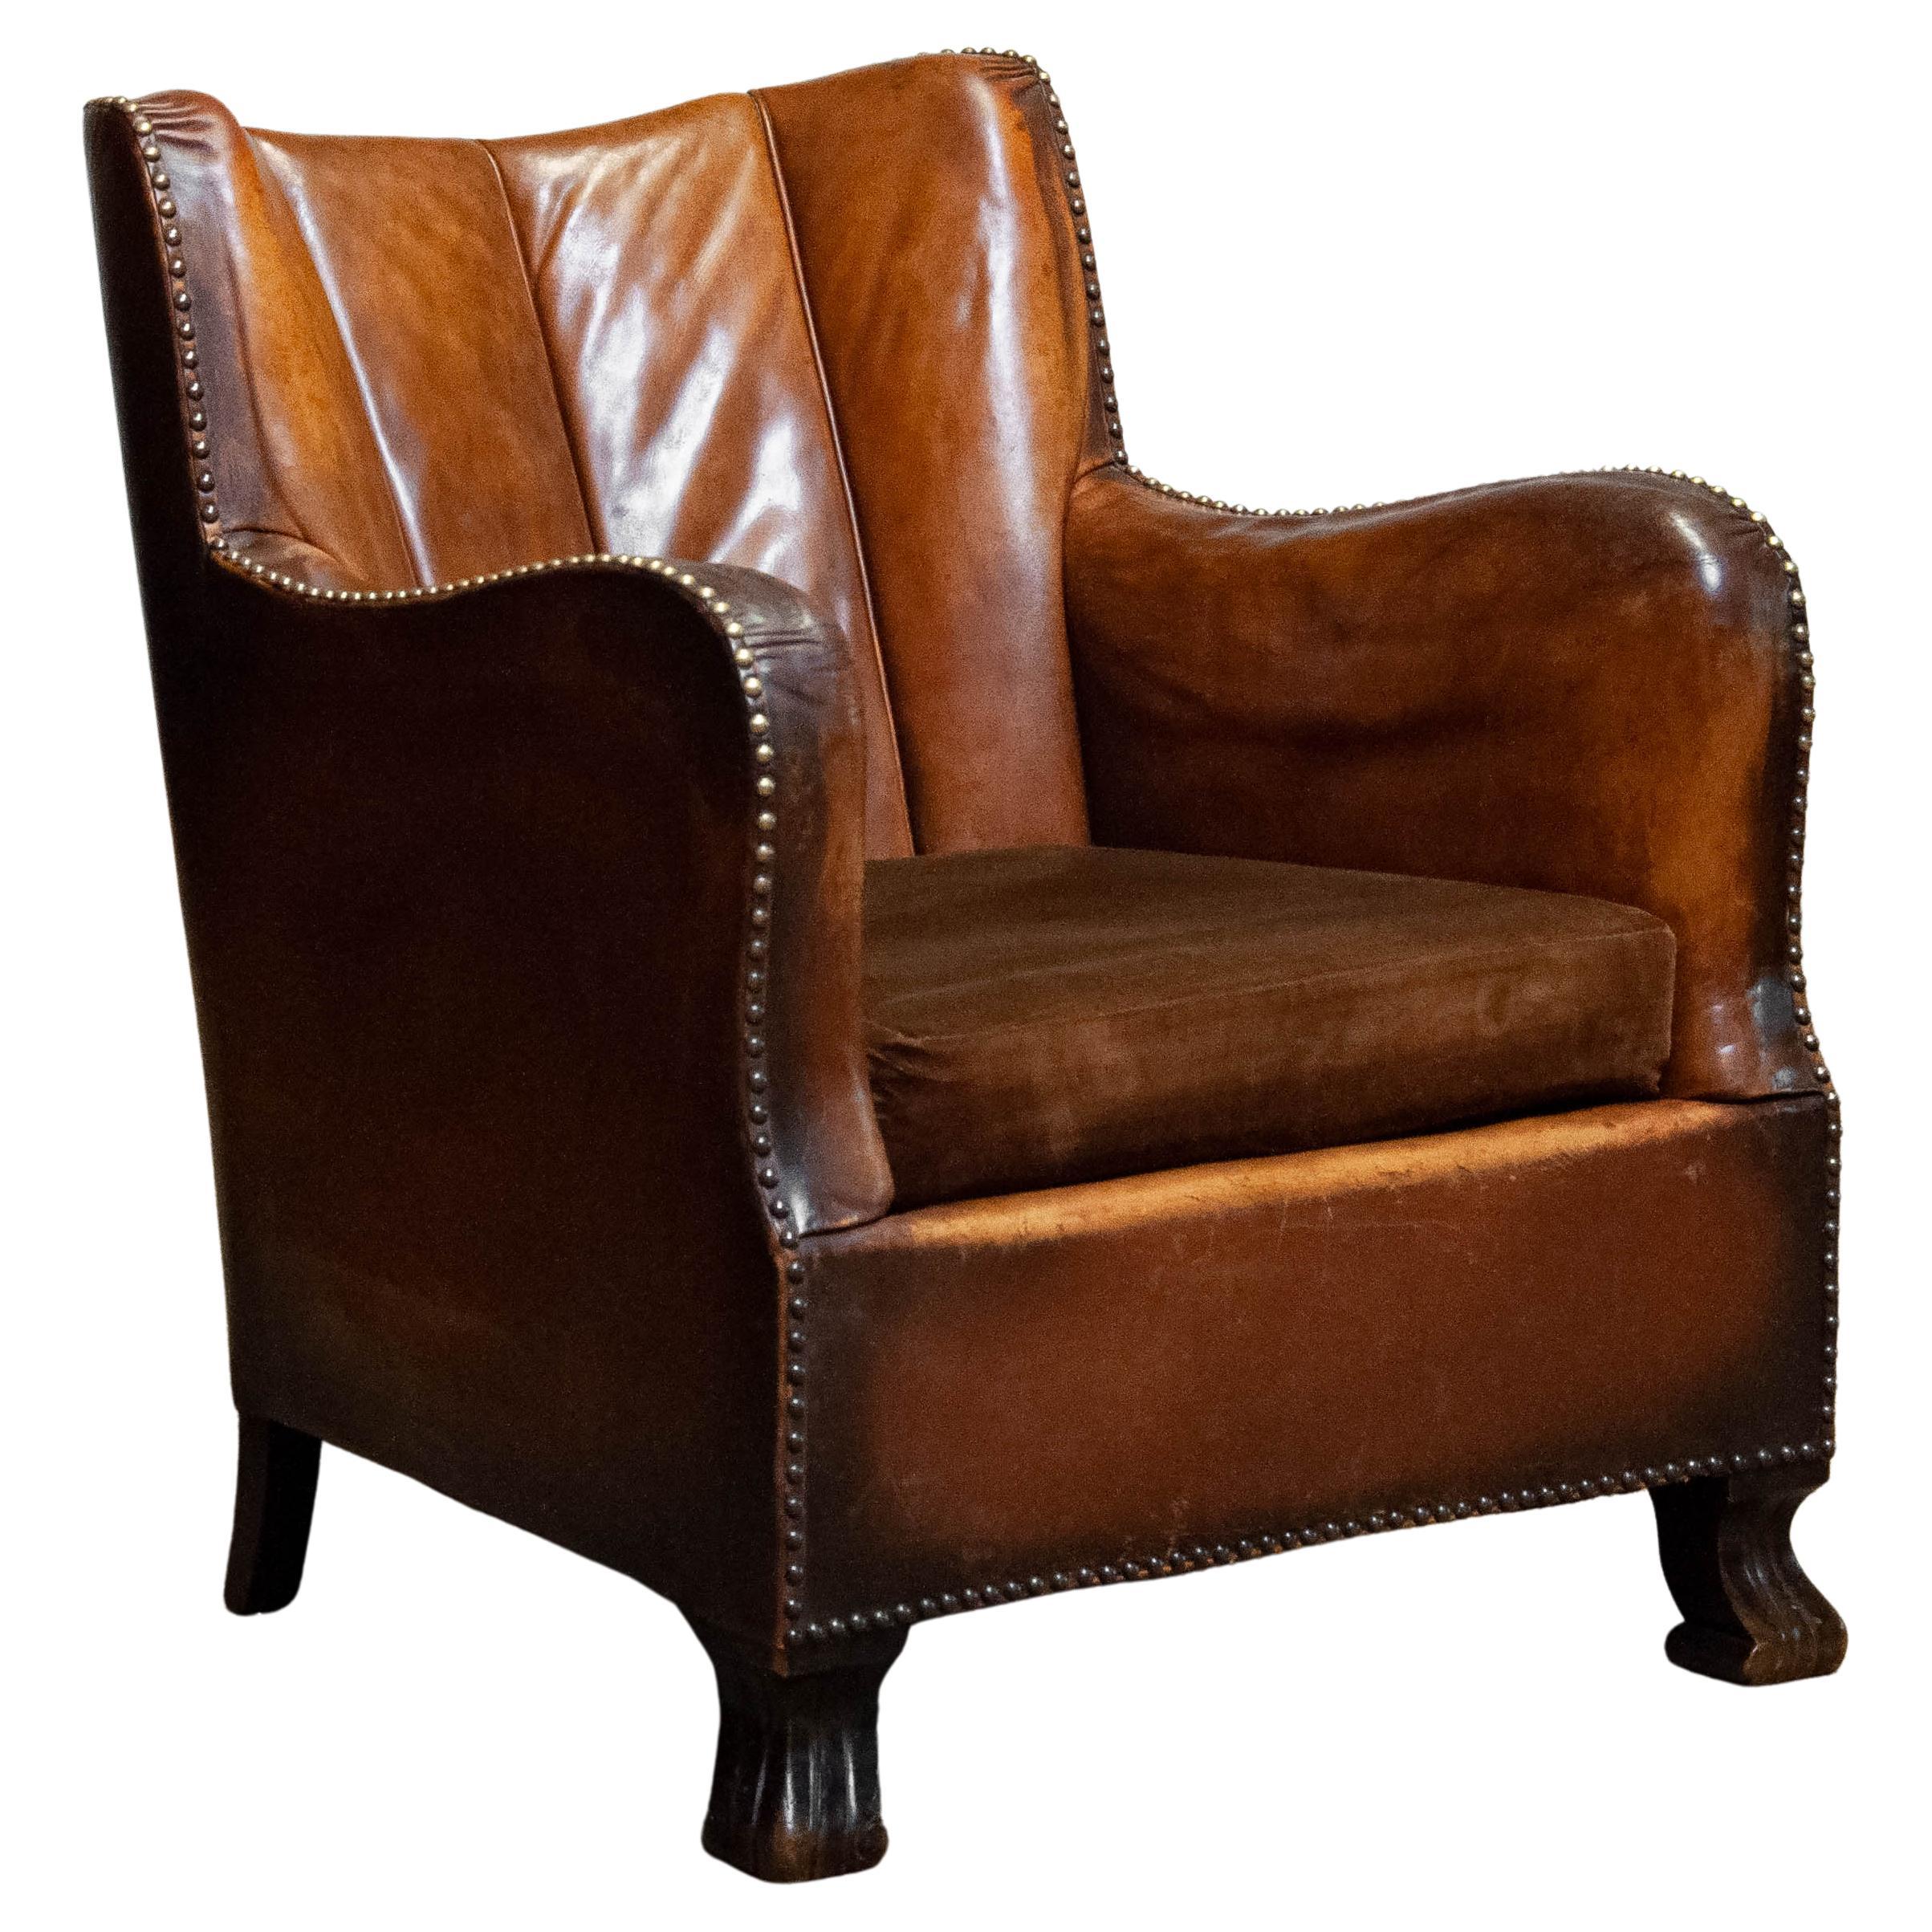 The 1930s Club Chair in Tan Brown Patinated Leather in the Style of Fritz Hansen